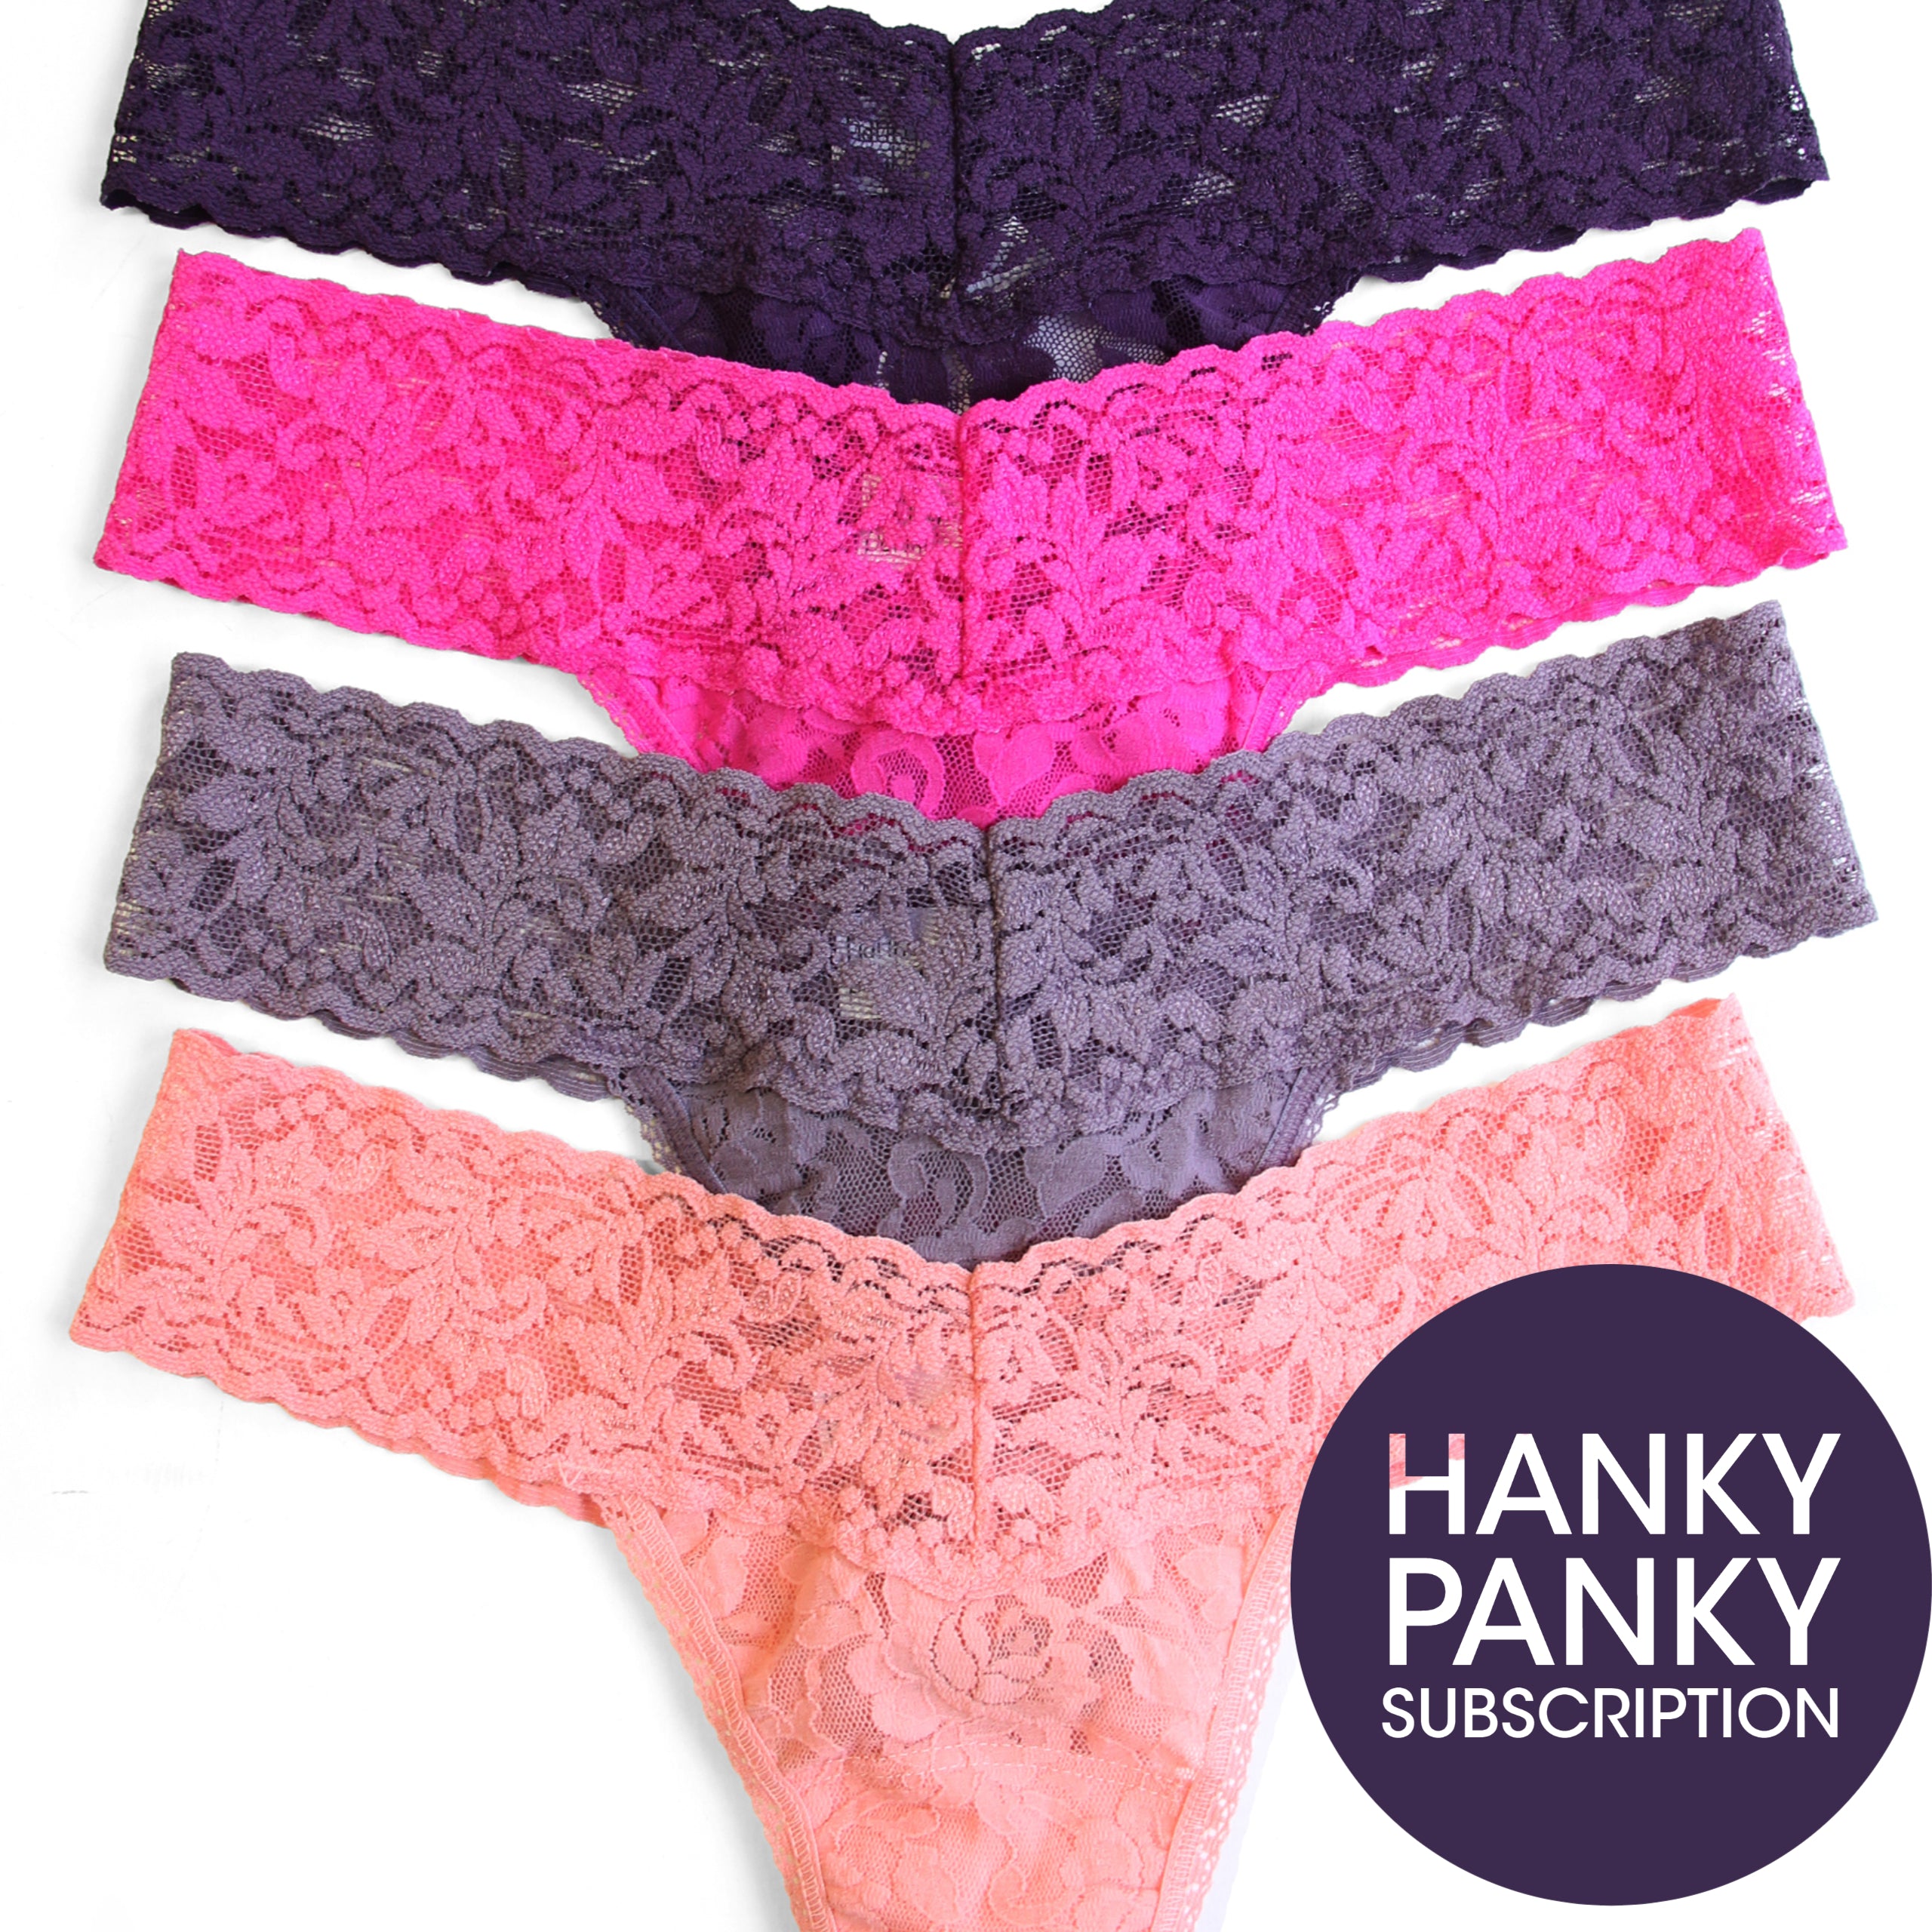 Buy solid Hanky Panky for a Year:  Thong Subscription Service